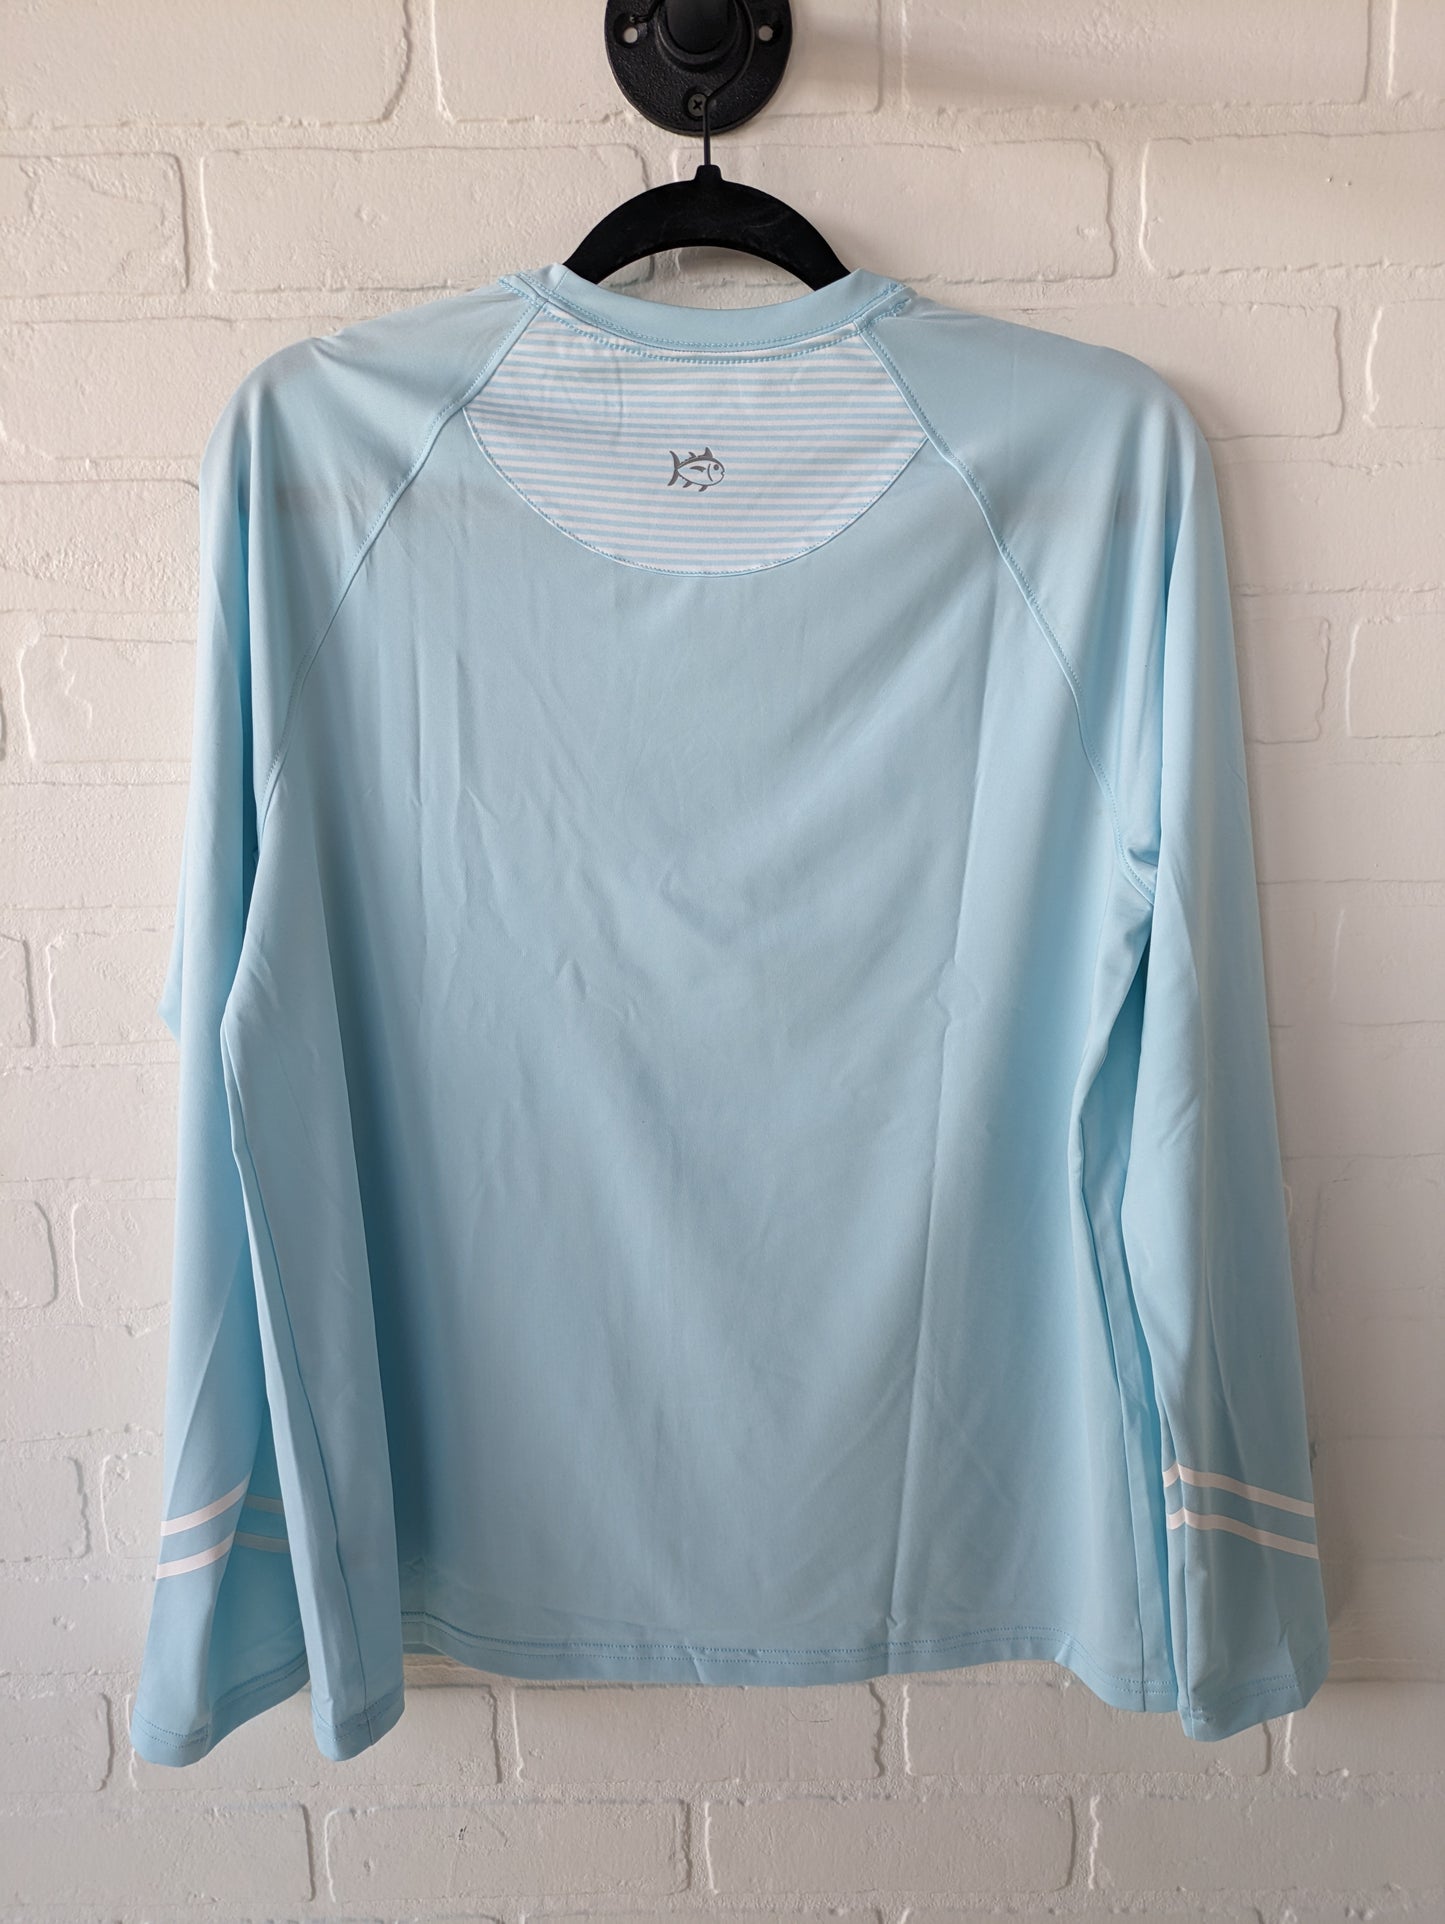 Athletic Top Long Sleeve Crewneck By Southern Tide  Size: M